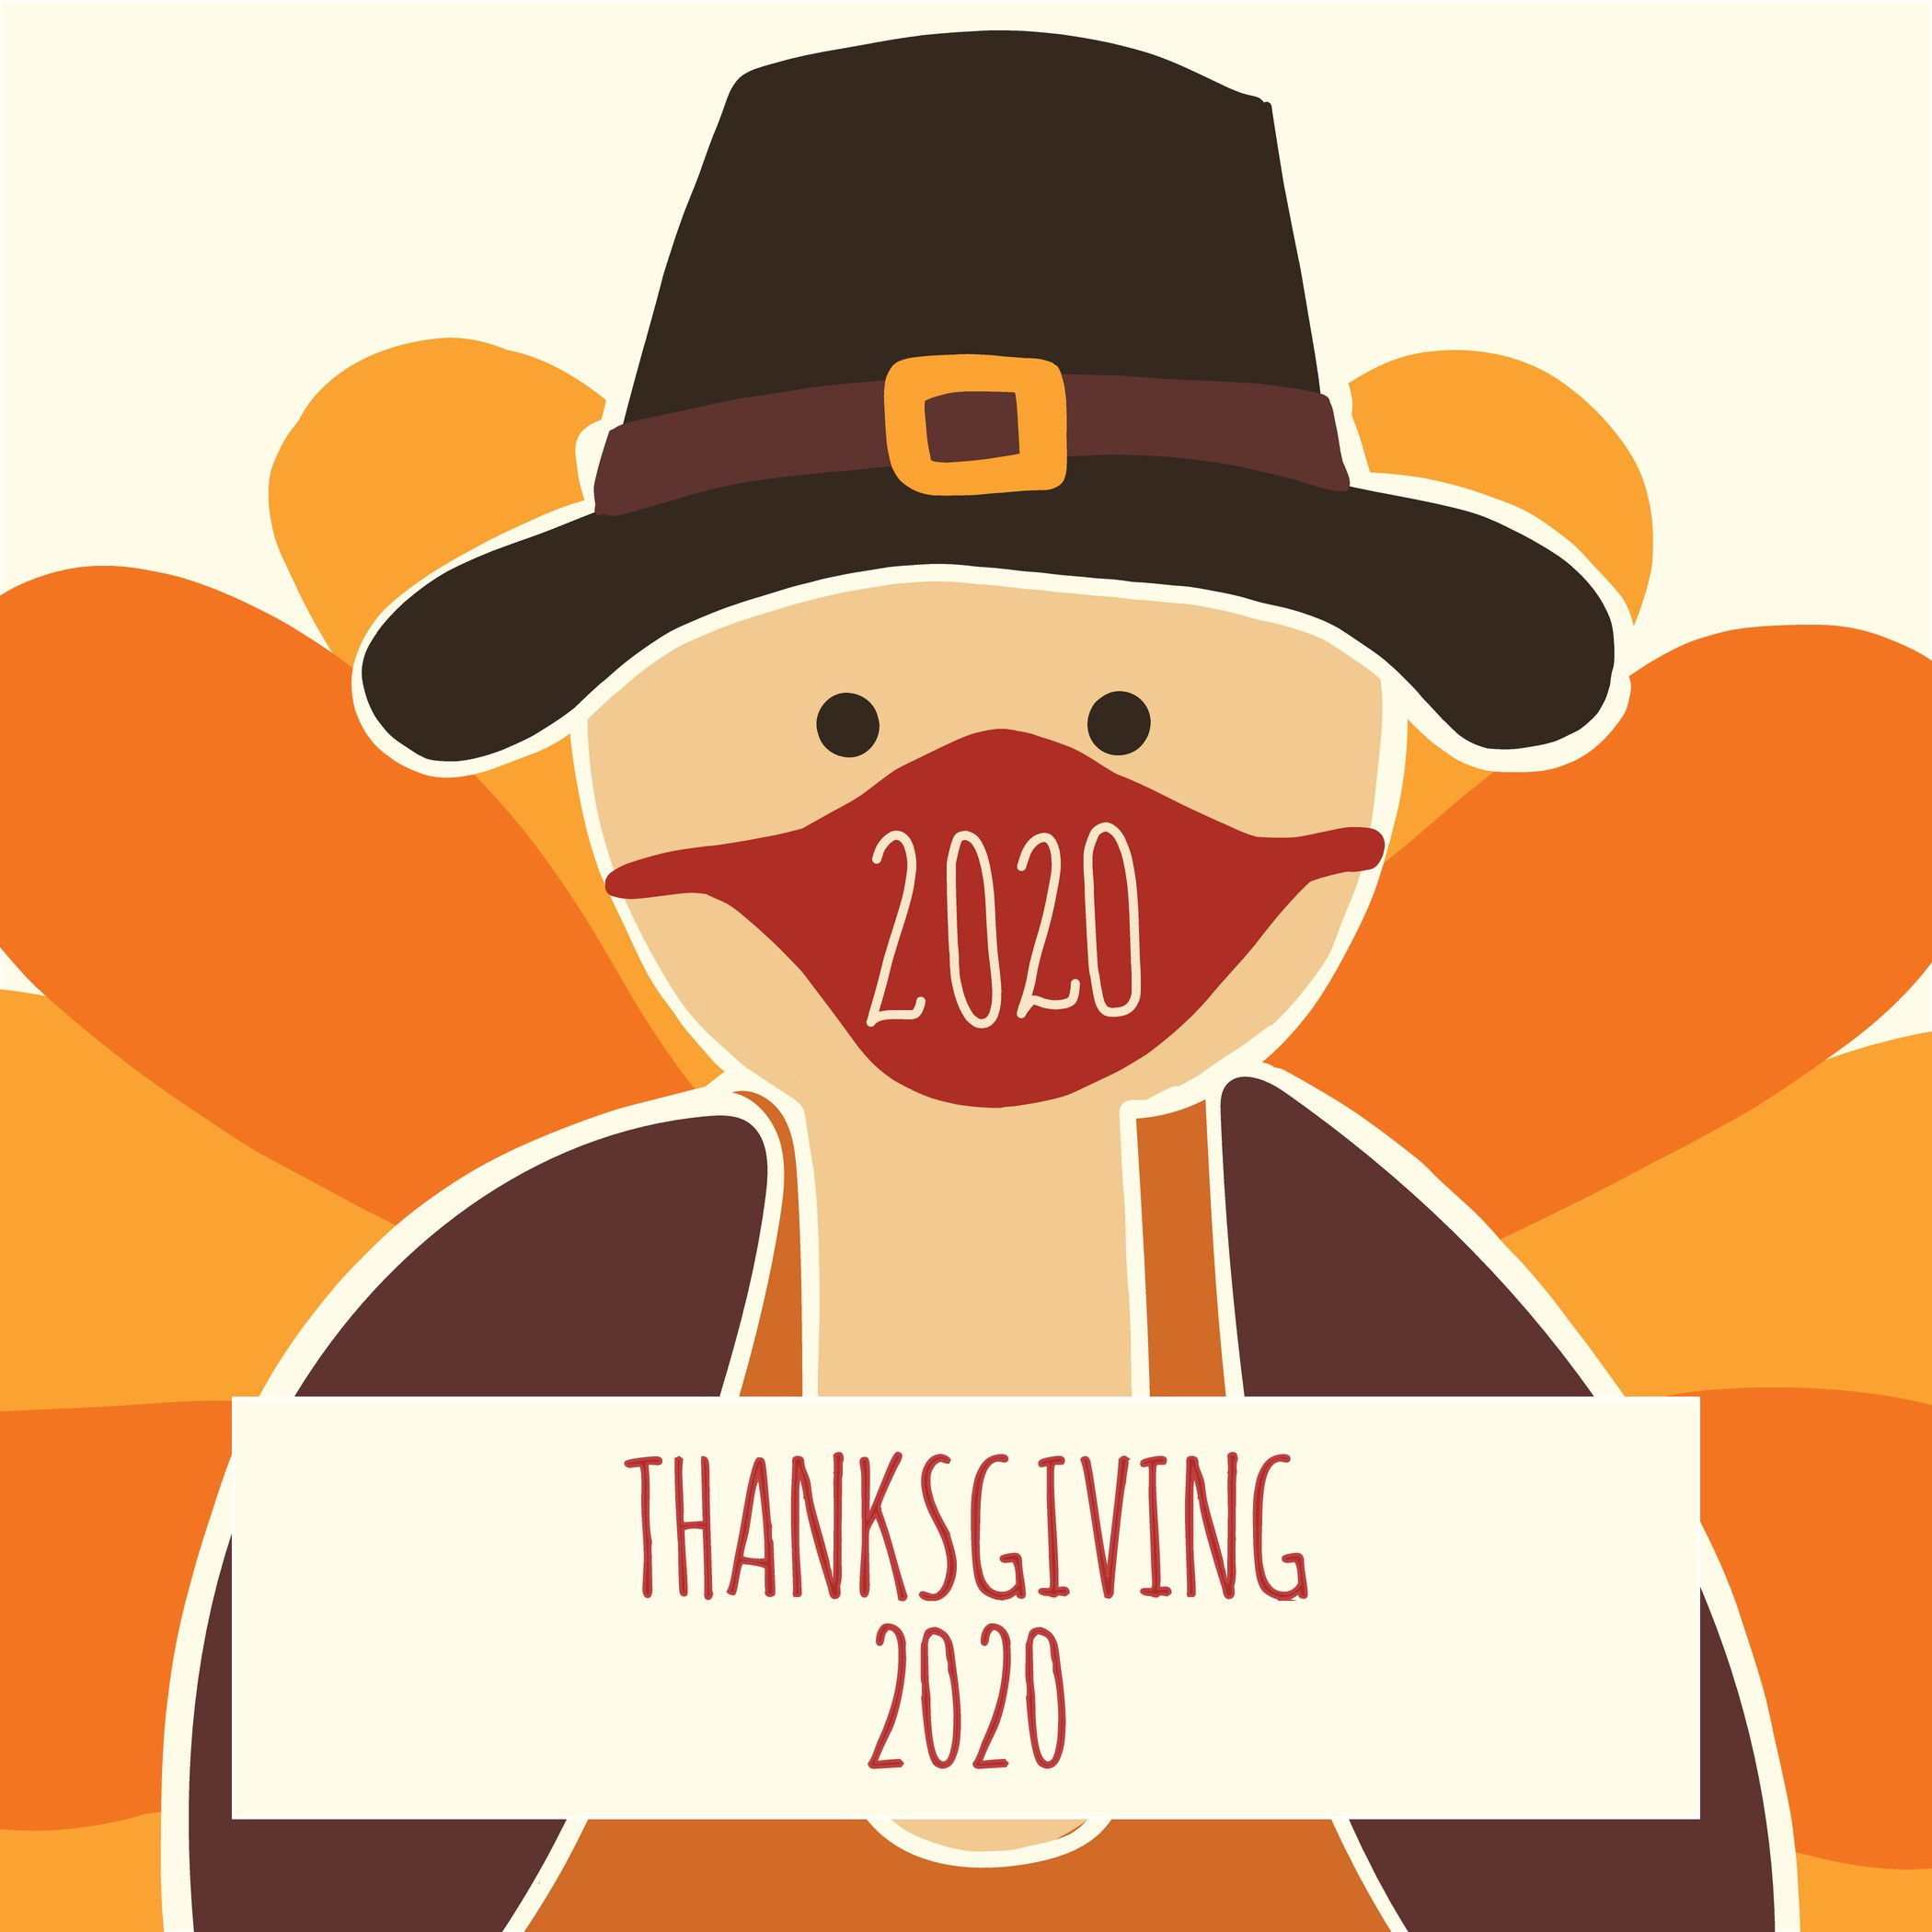 What’s to Be Thankful For in 2020?